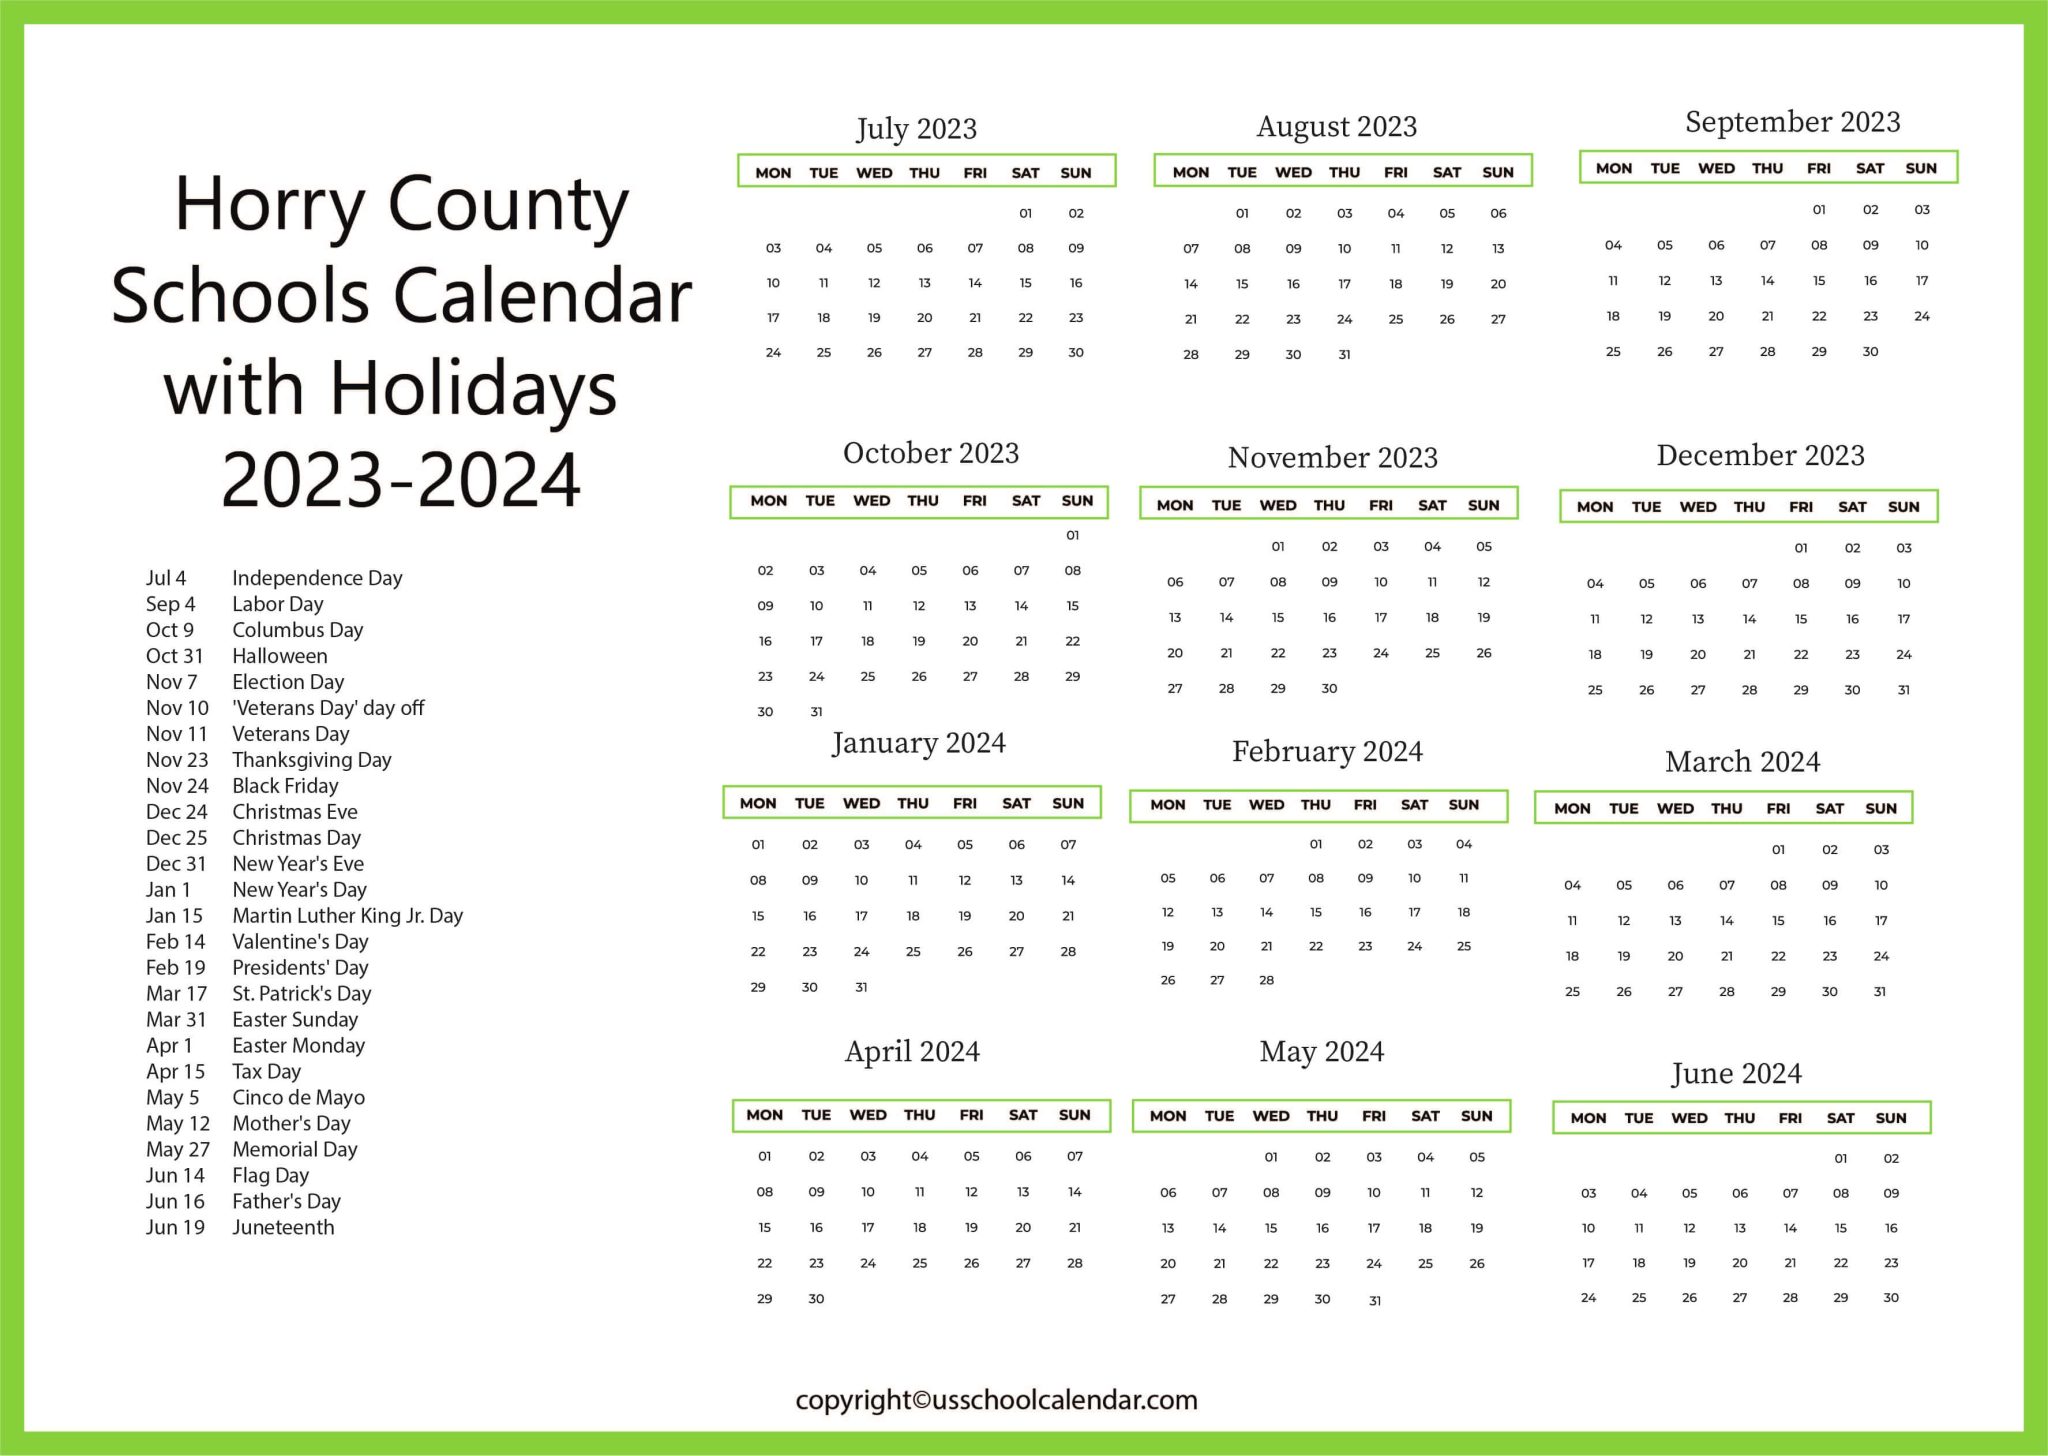 Horry County Schools Calendar with Holidays 2023-2024